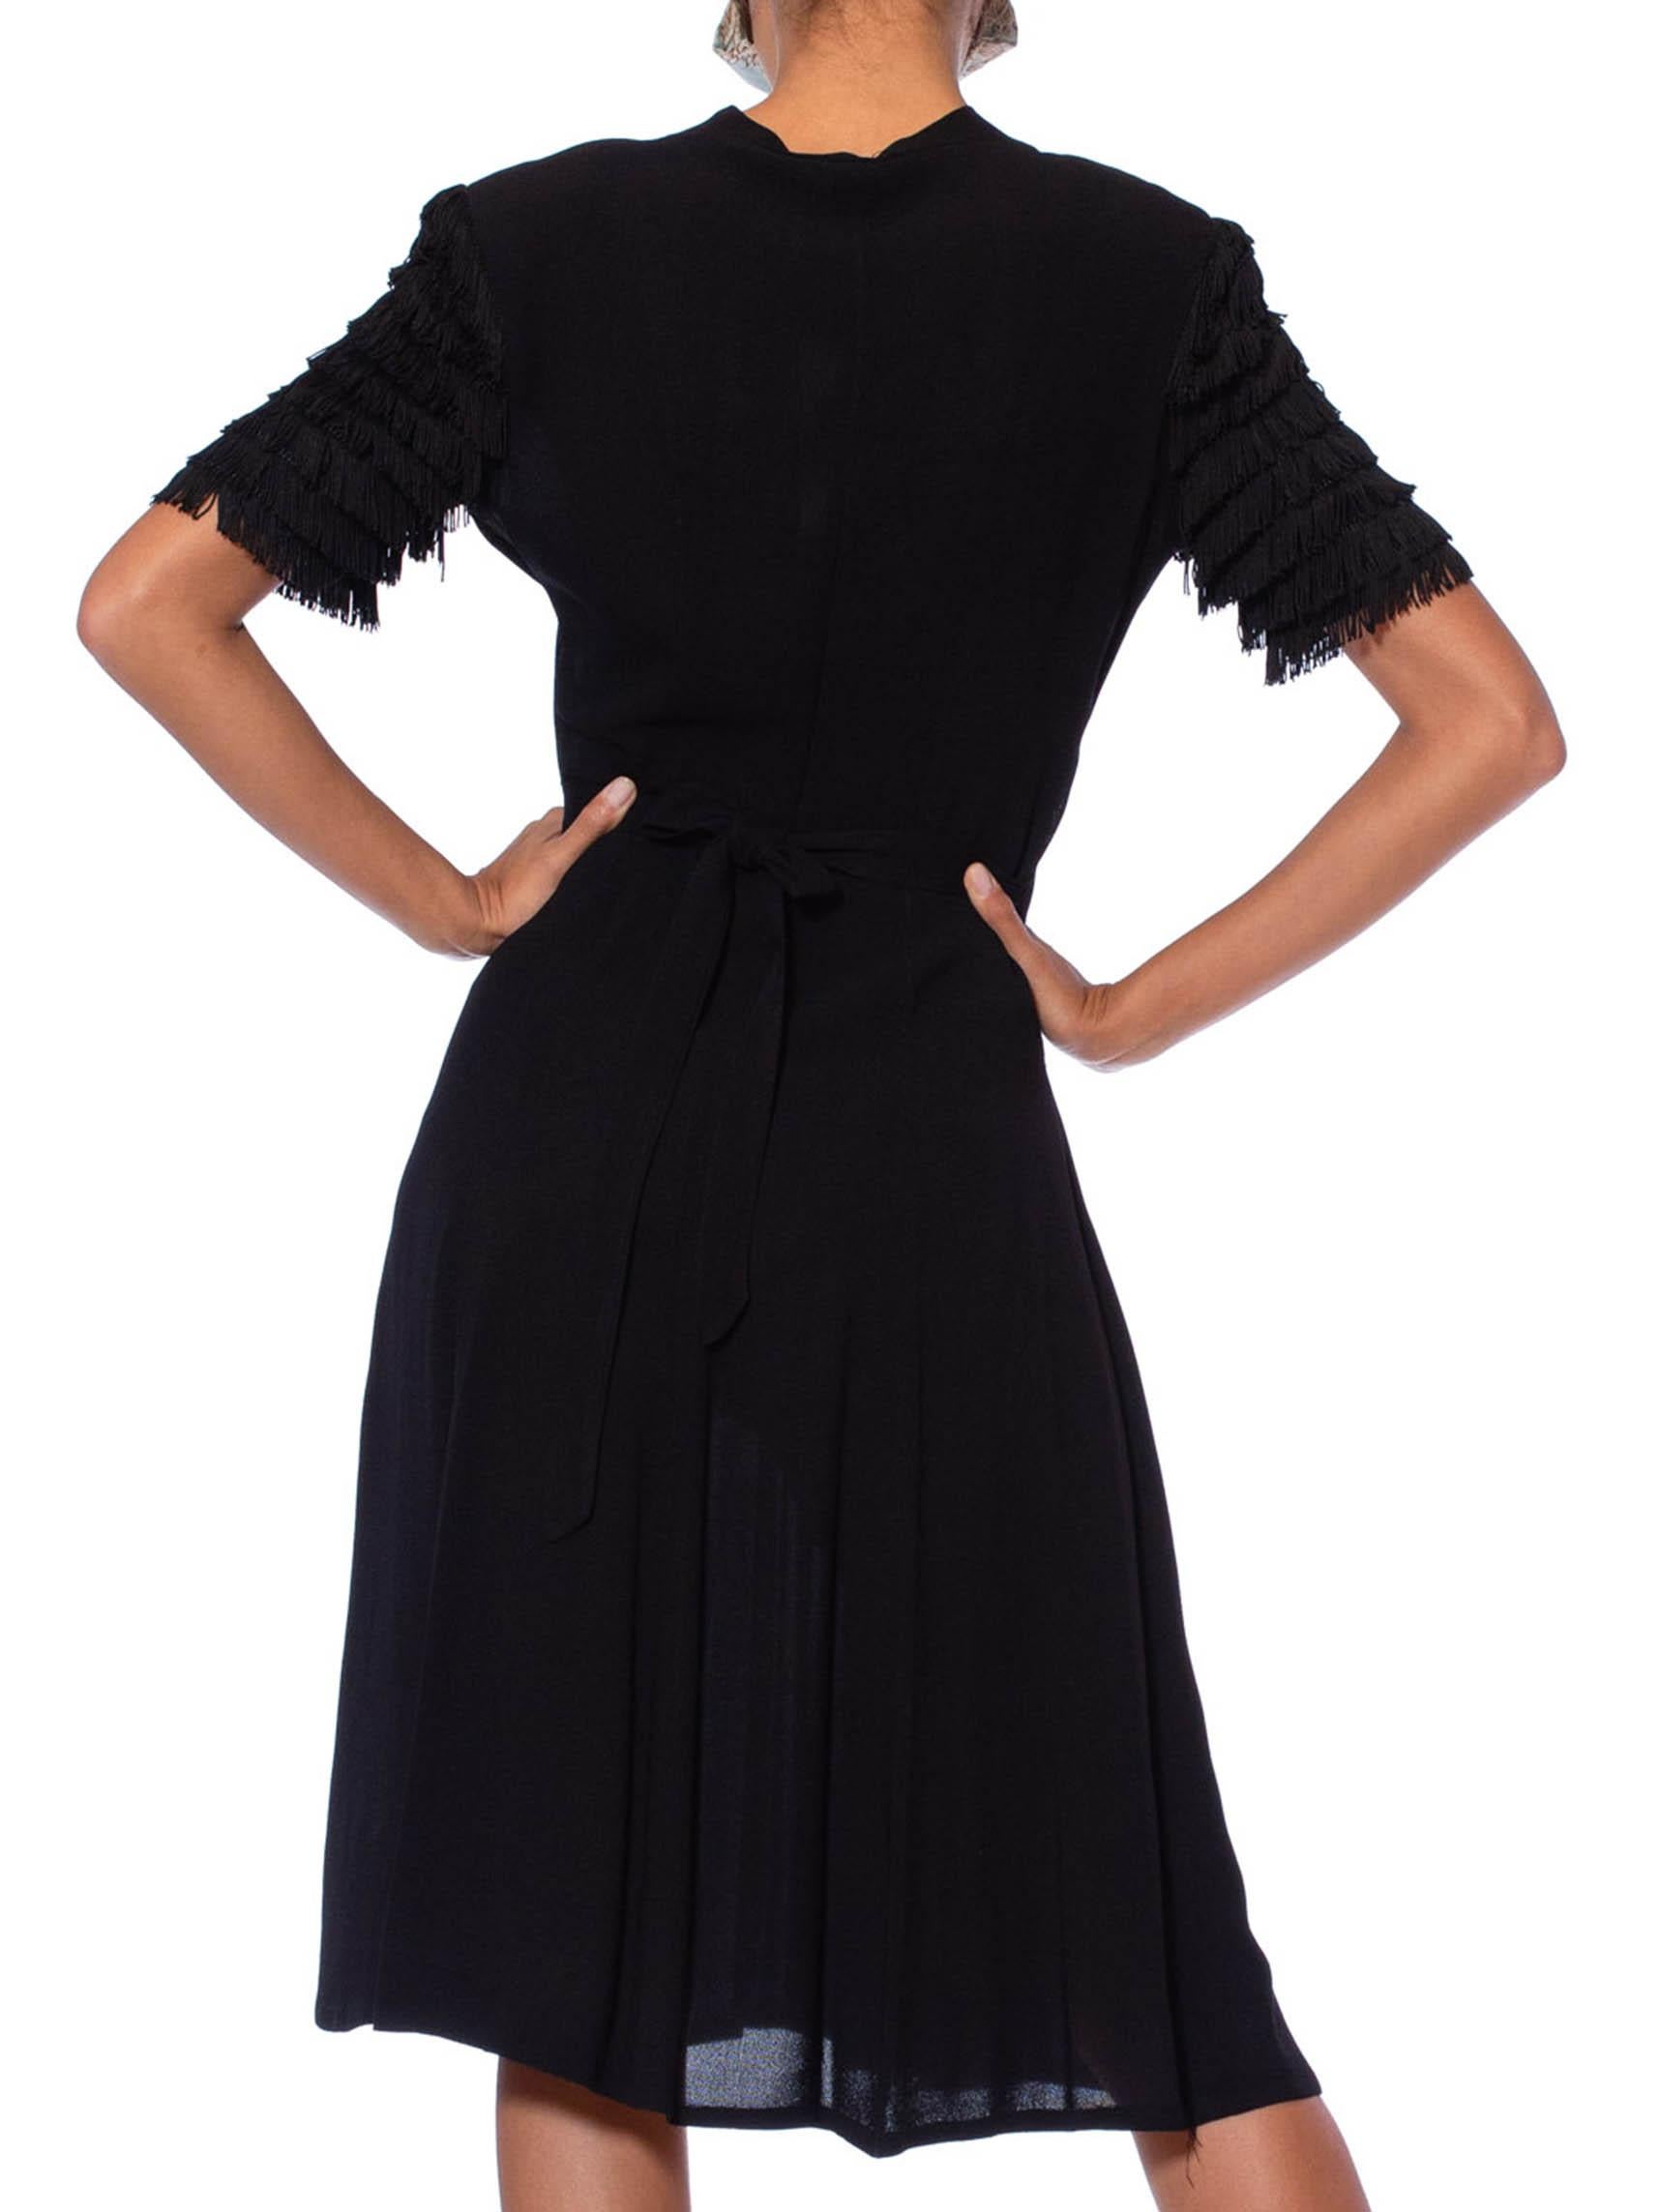 1940S Black Rayon Crepe Shirred Front Dress With Fringe Sleeves For Sale 5